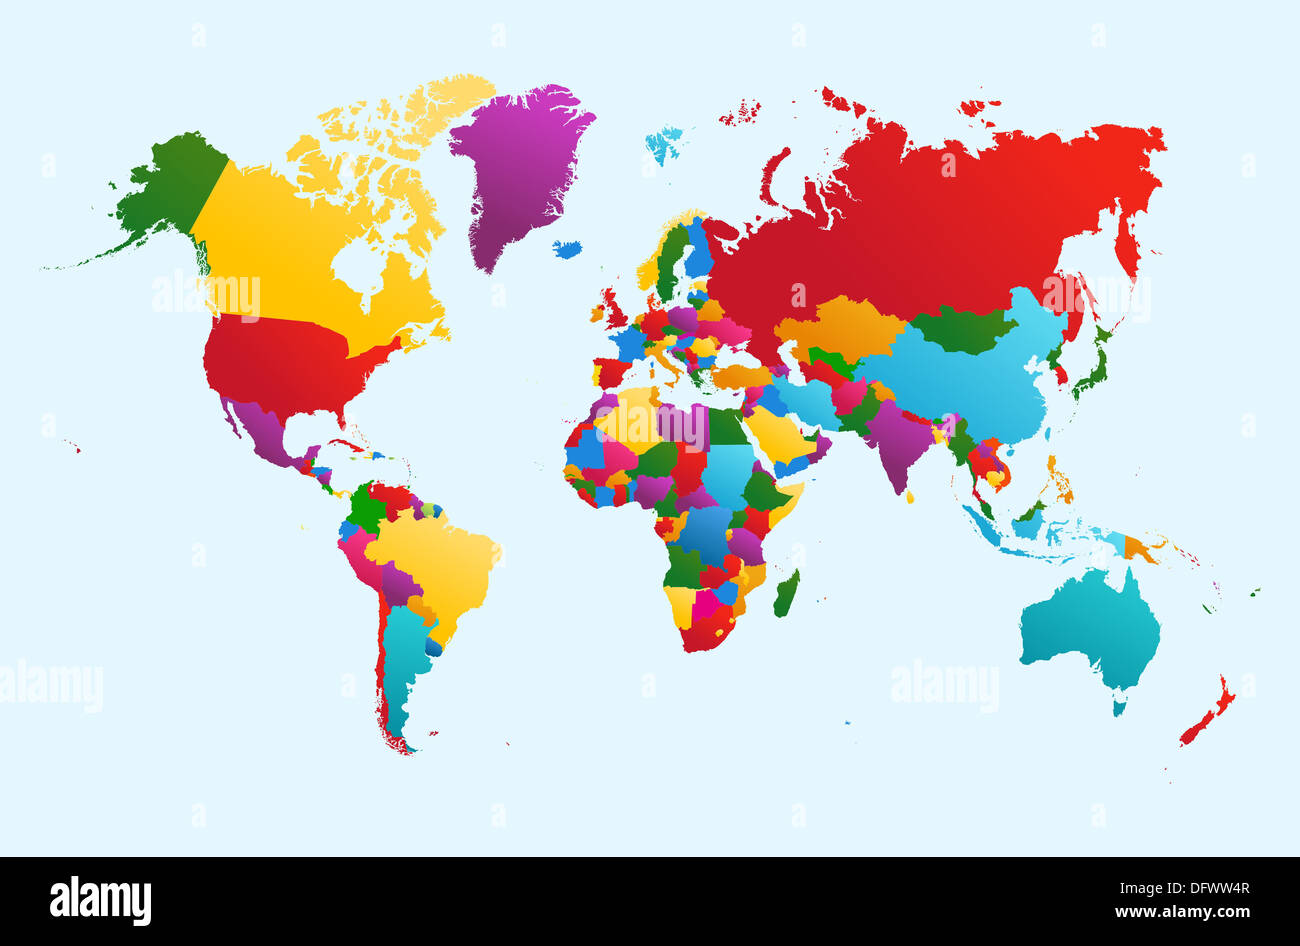 World Map Hd Picture World Map Hd Image 5 Free Large Printable World